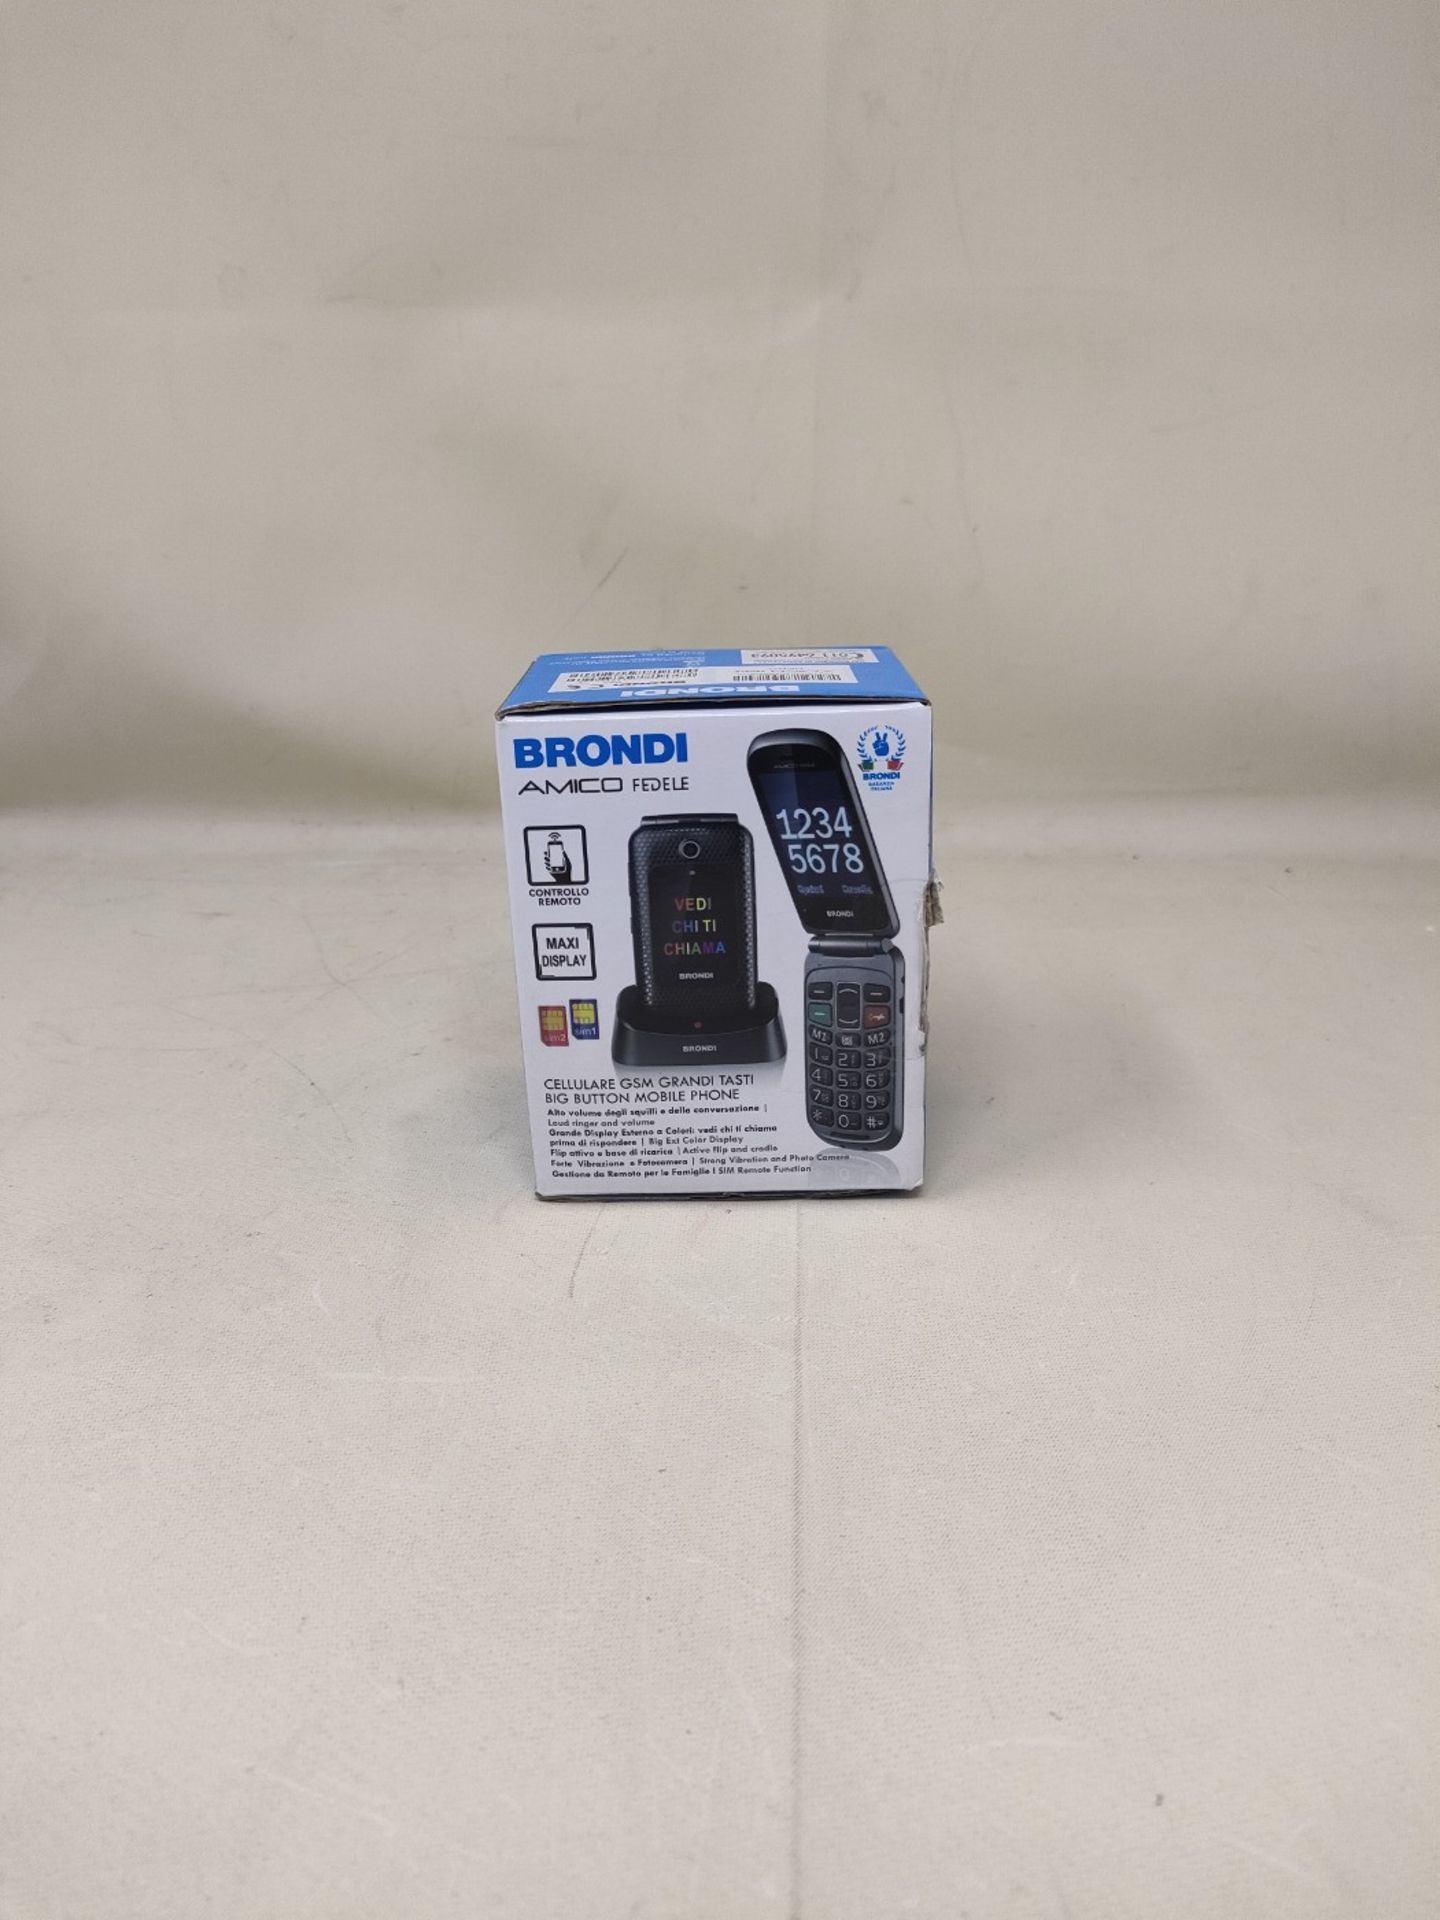 RRP £65.00 Brondi Amico Fedele, GSM mobile phone for the elderly with large buttons, SOS button a - Image 2 of 3